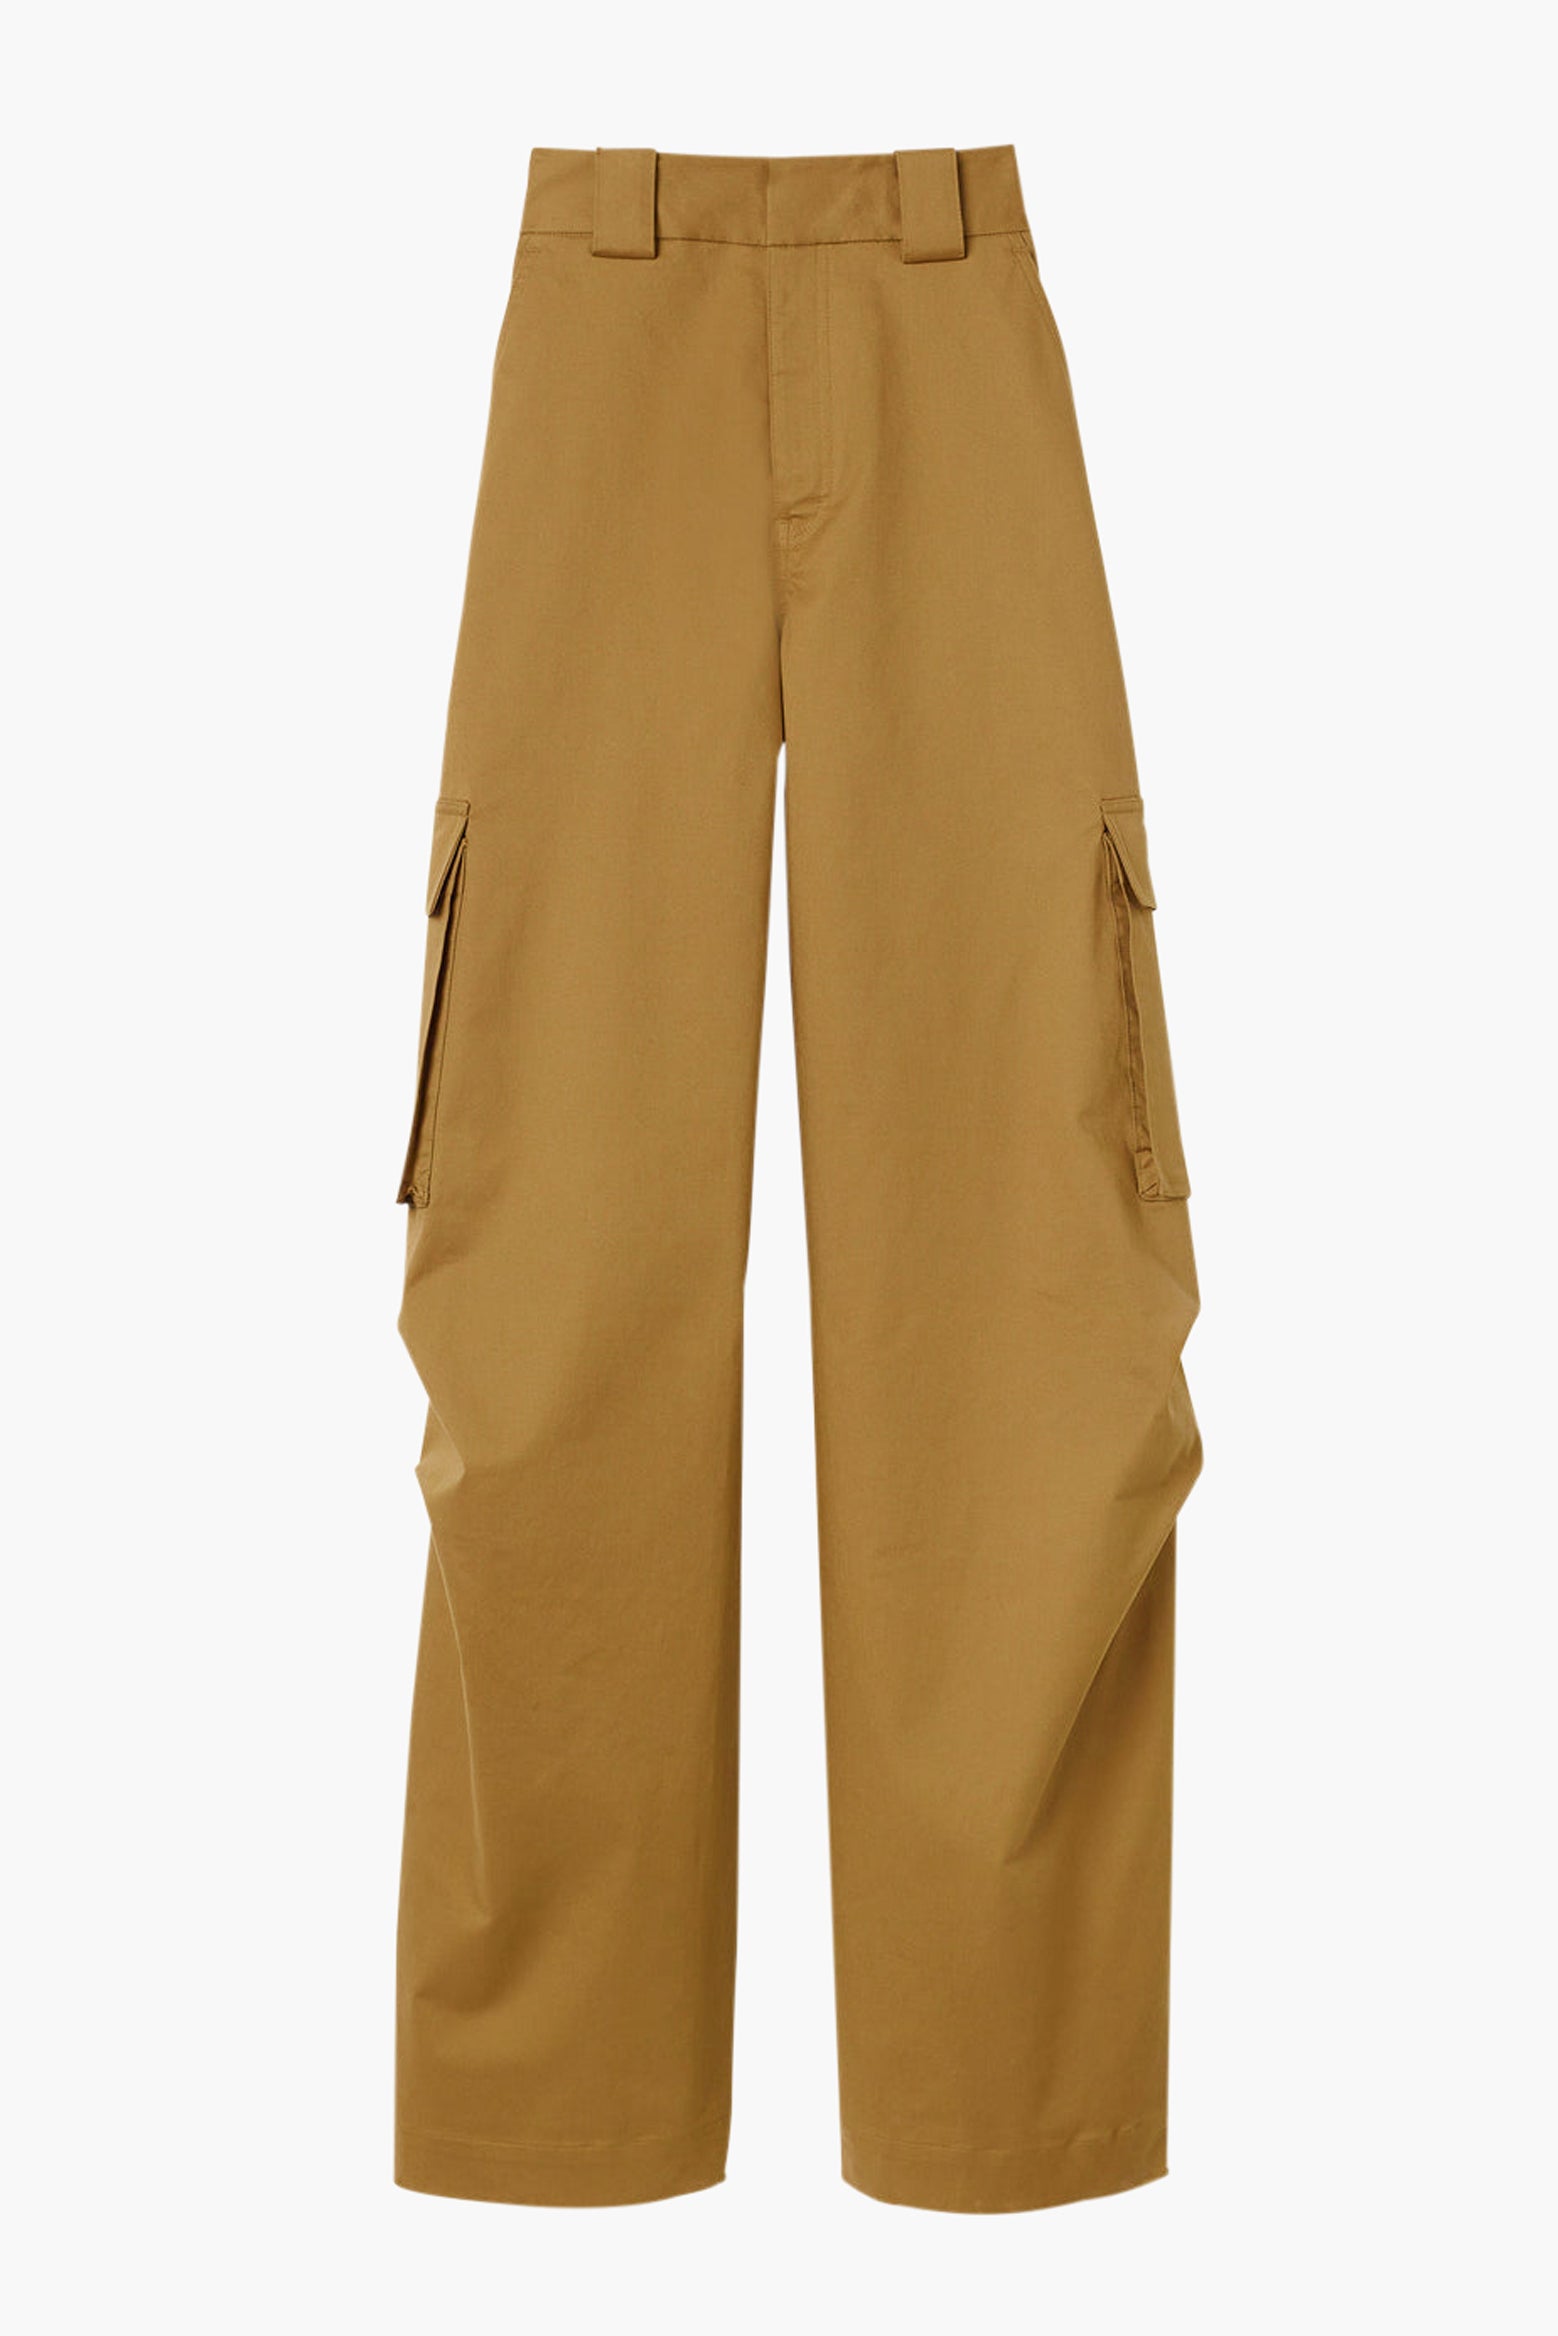 The ALC Brie Pant in dark butterscotch available at The New Trend Australia